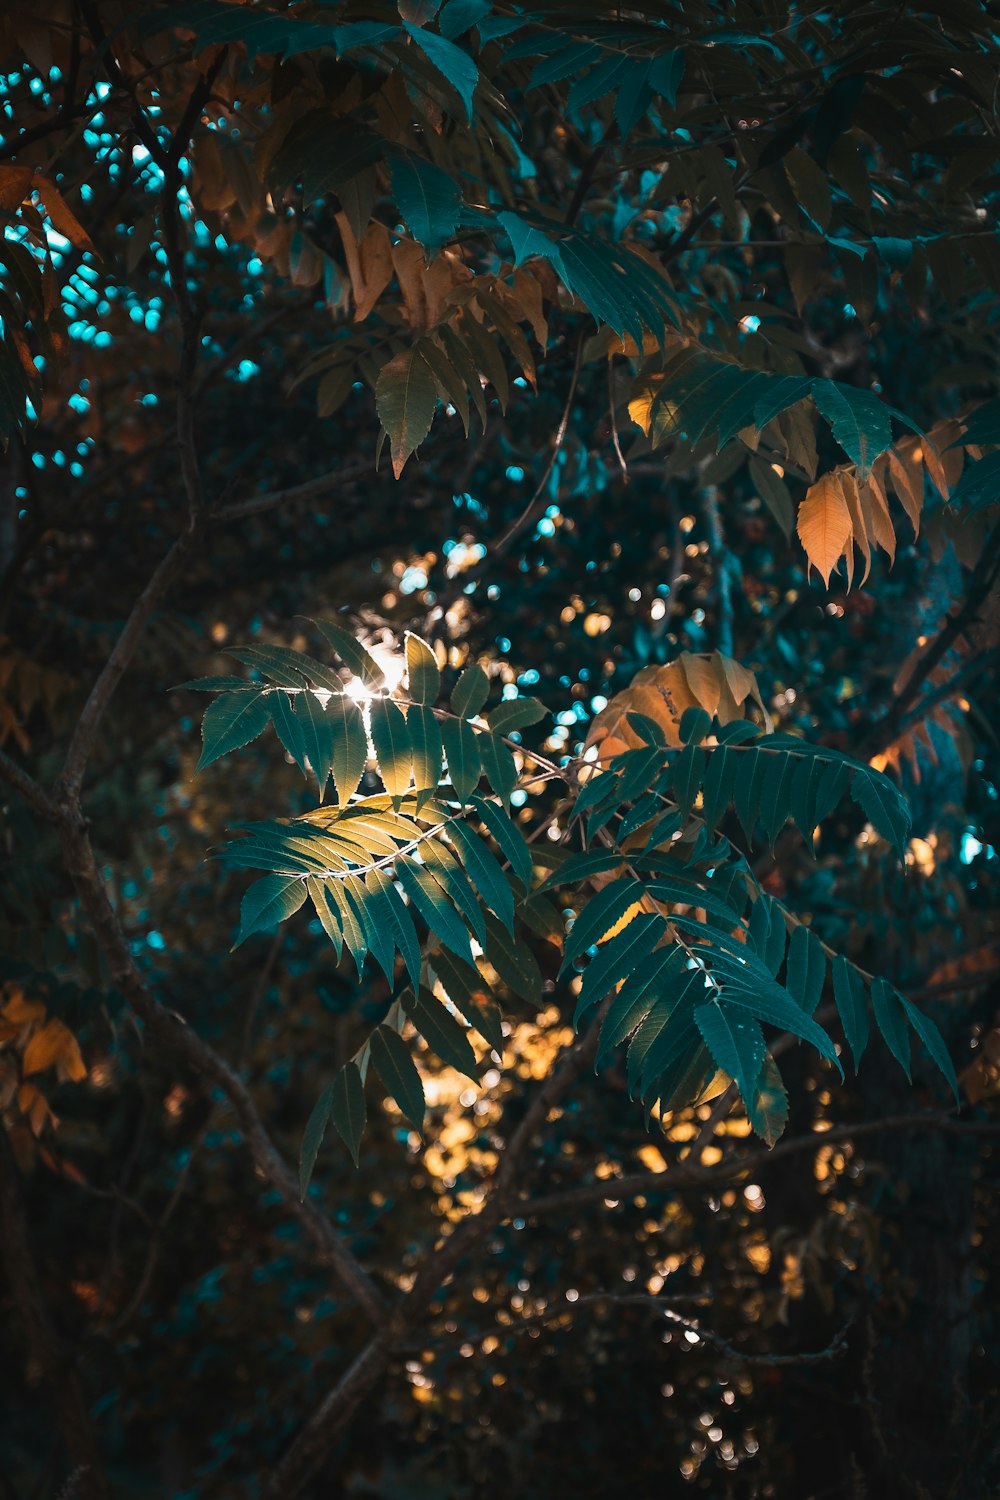 sunlight shining through the leaves of a tree